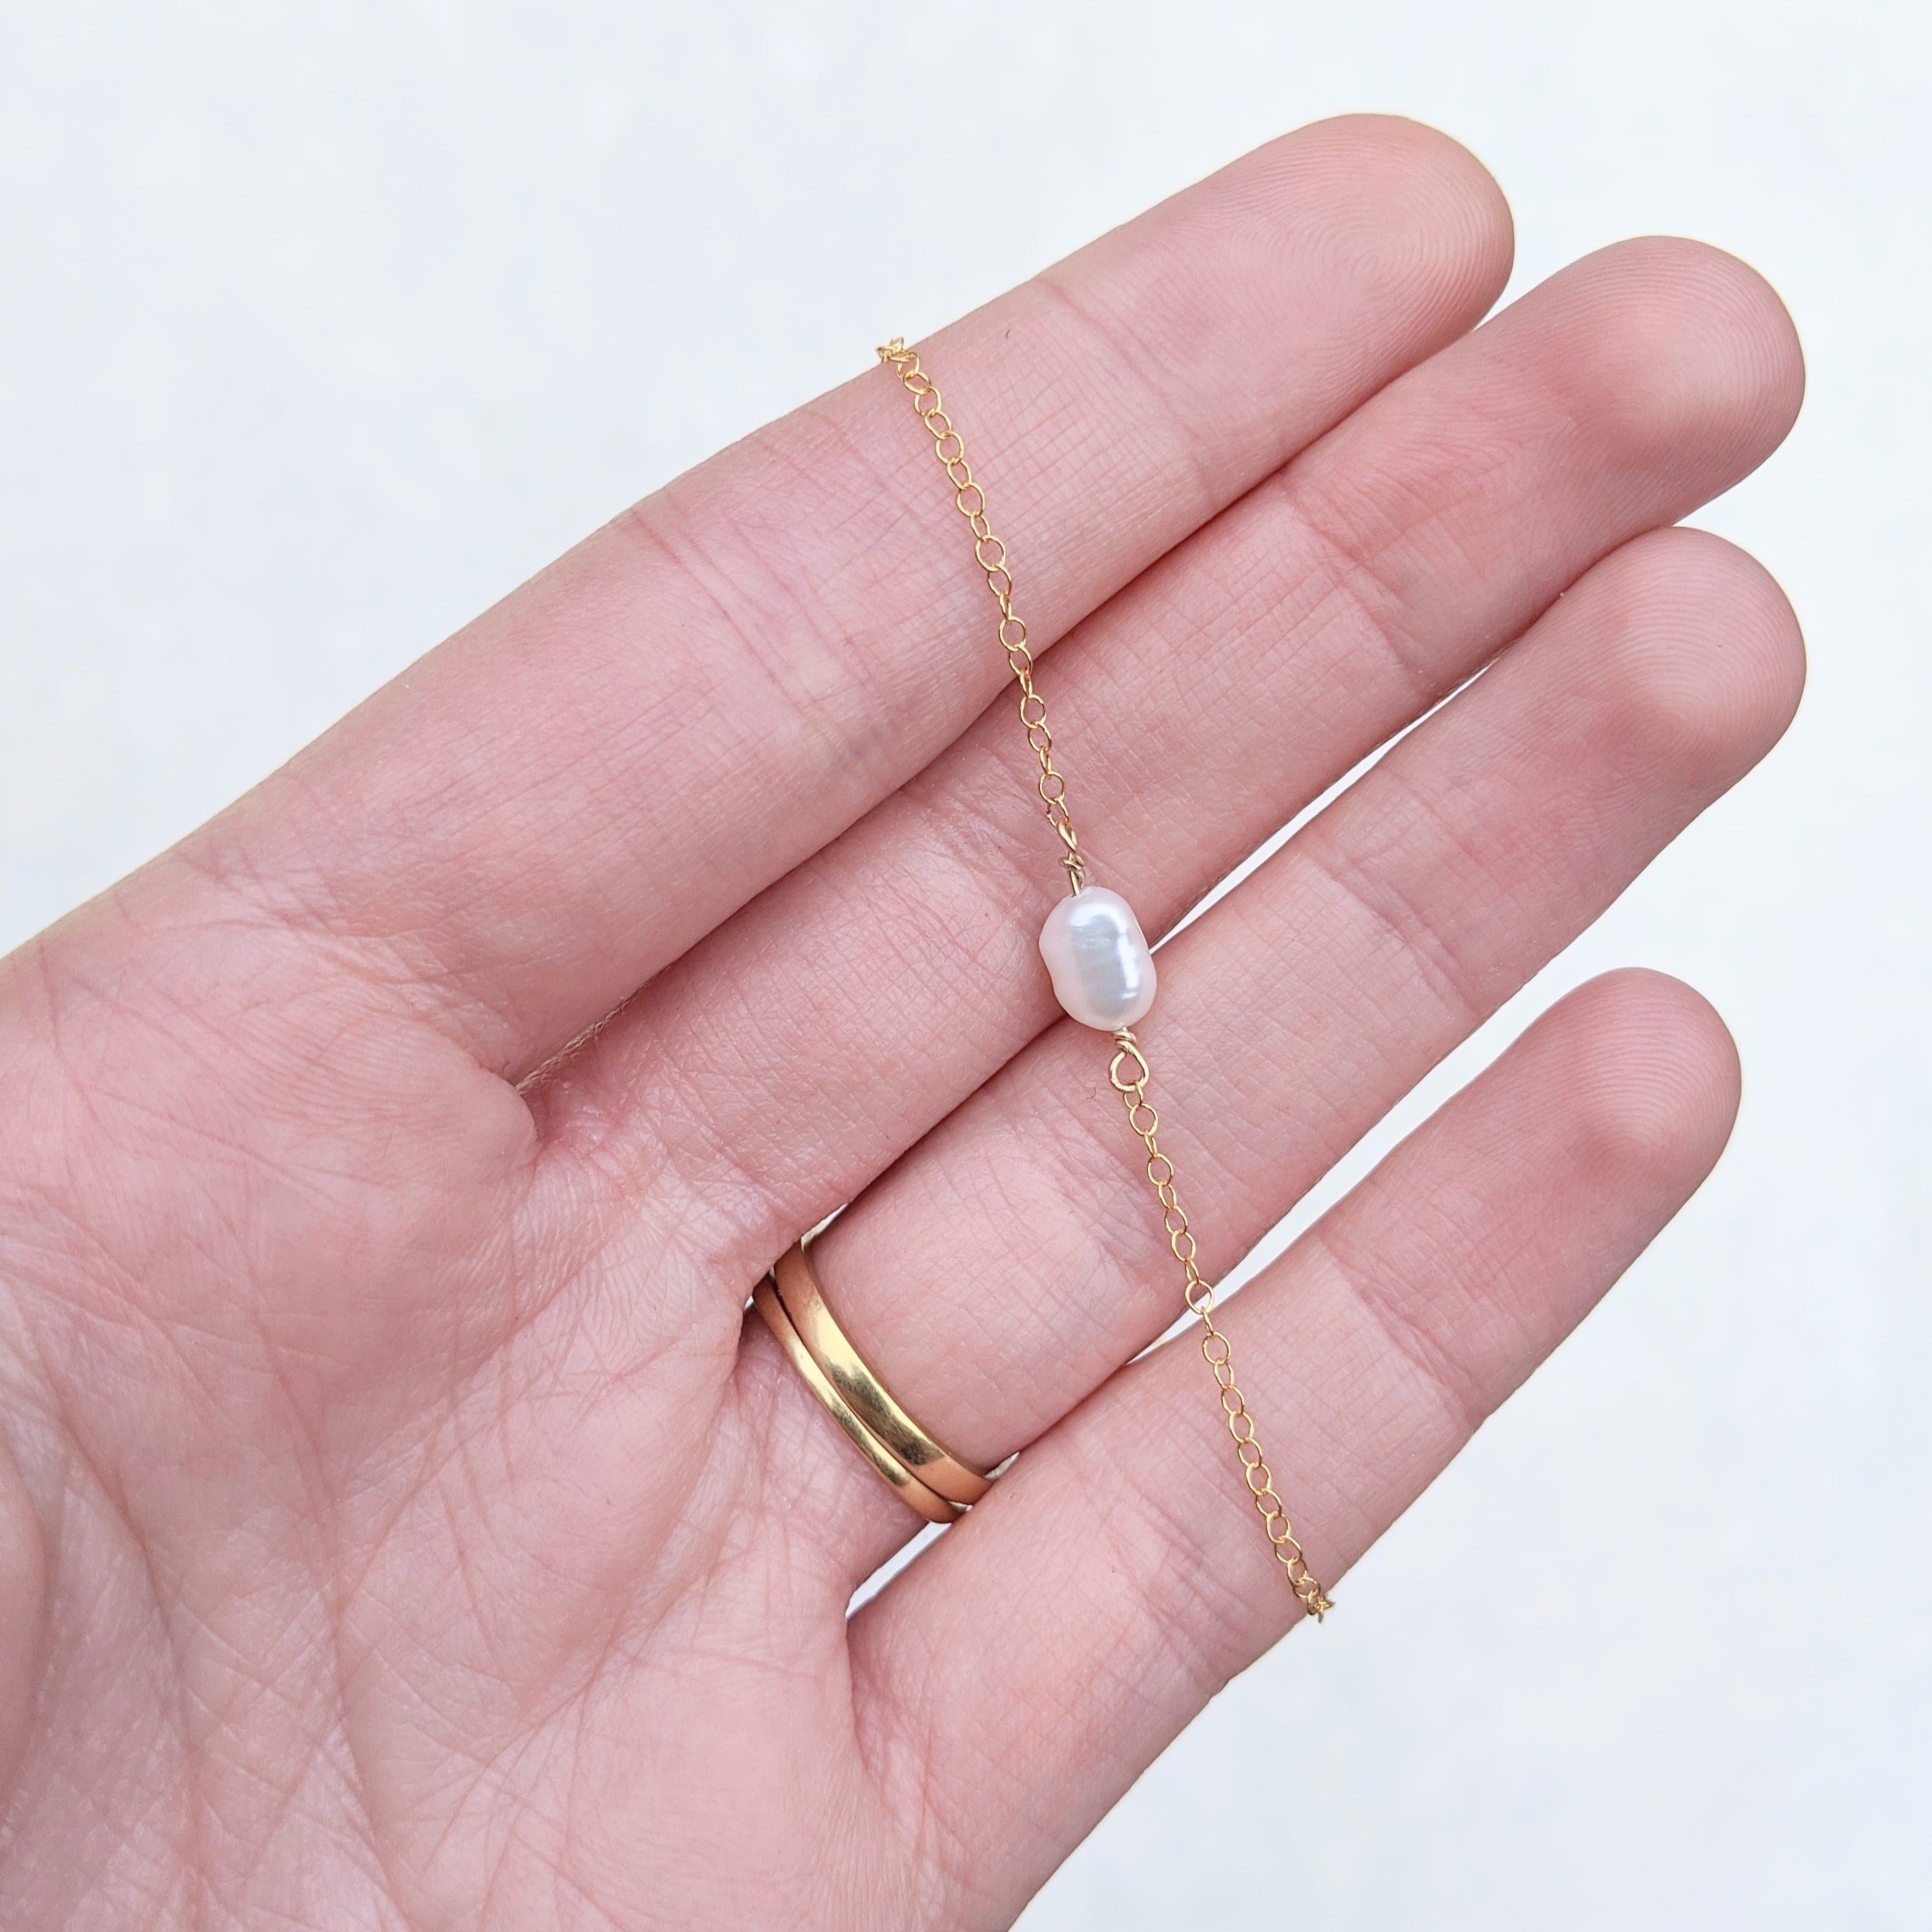 Single small white pearl on gold chain necklace in hand